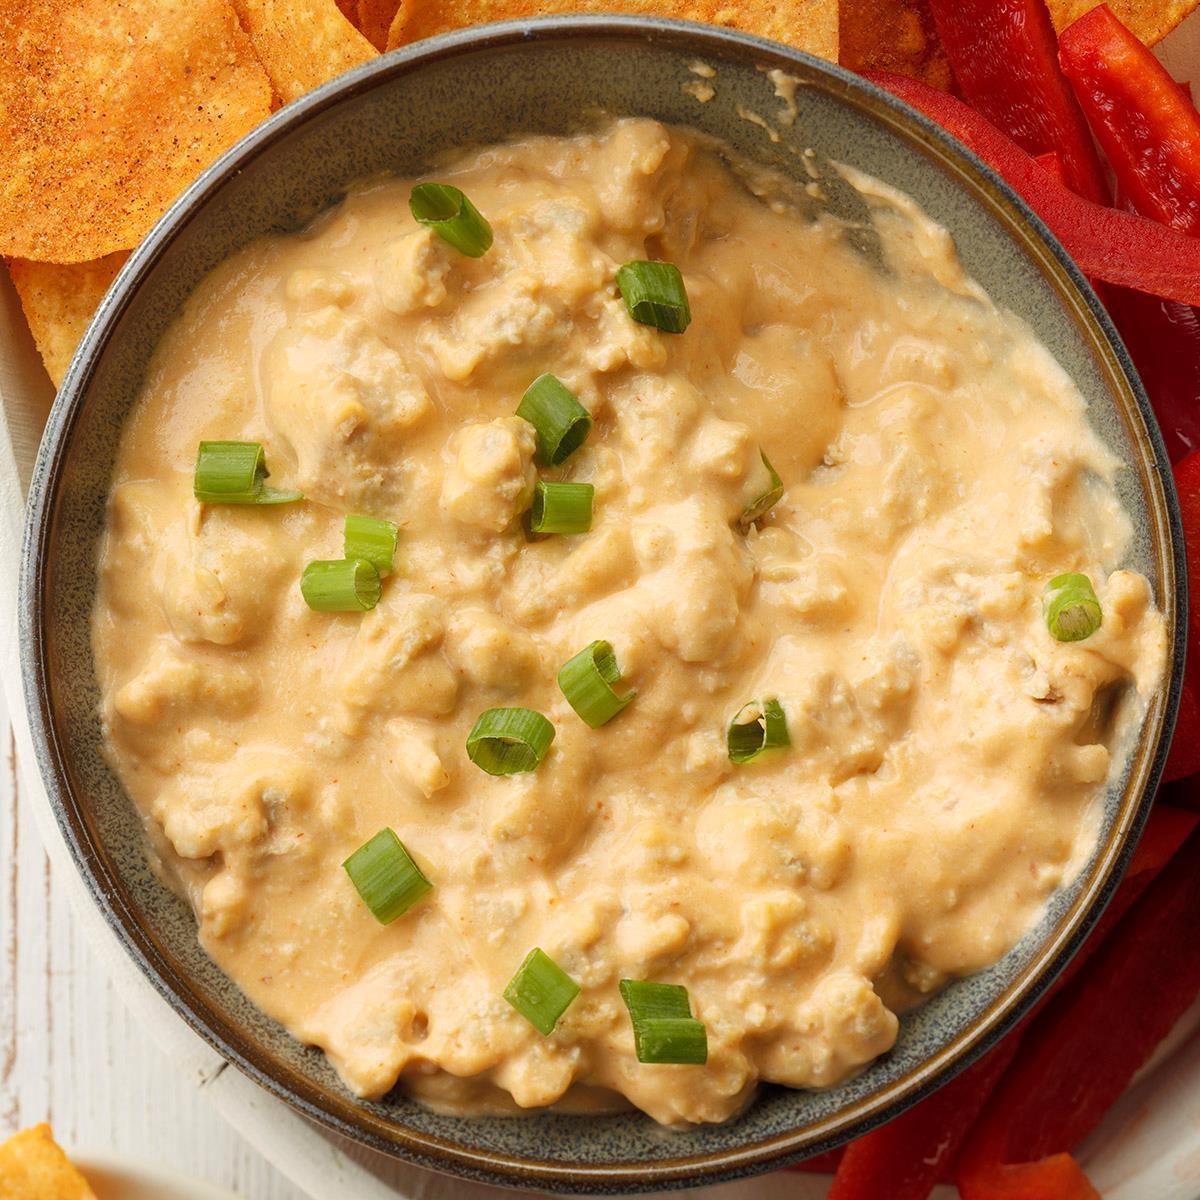 https://www.tasteofhome.com/wp-content/uploads/0001/01/Spicy-Honey-Sriracha-Game-Day-Dip-_EXPS_THEDSC19_201703_B03_01_5b_rms.jpg